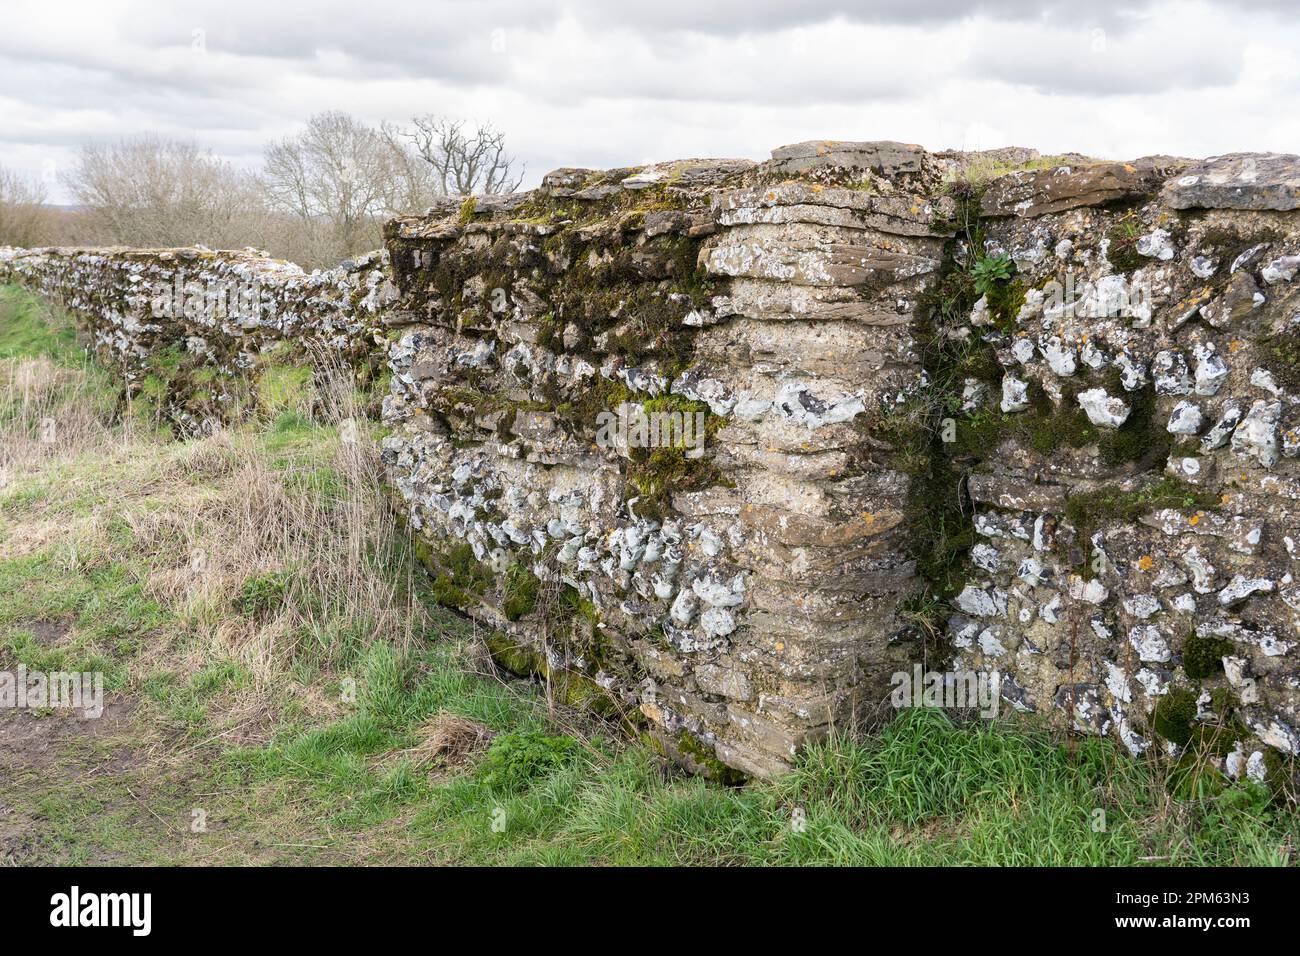 Ruined Roman town wall built of flint and stone with lime mortar at Silchester, Hampshire, UK Stock Photo